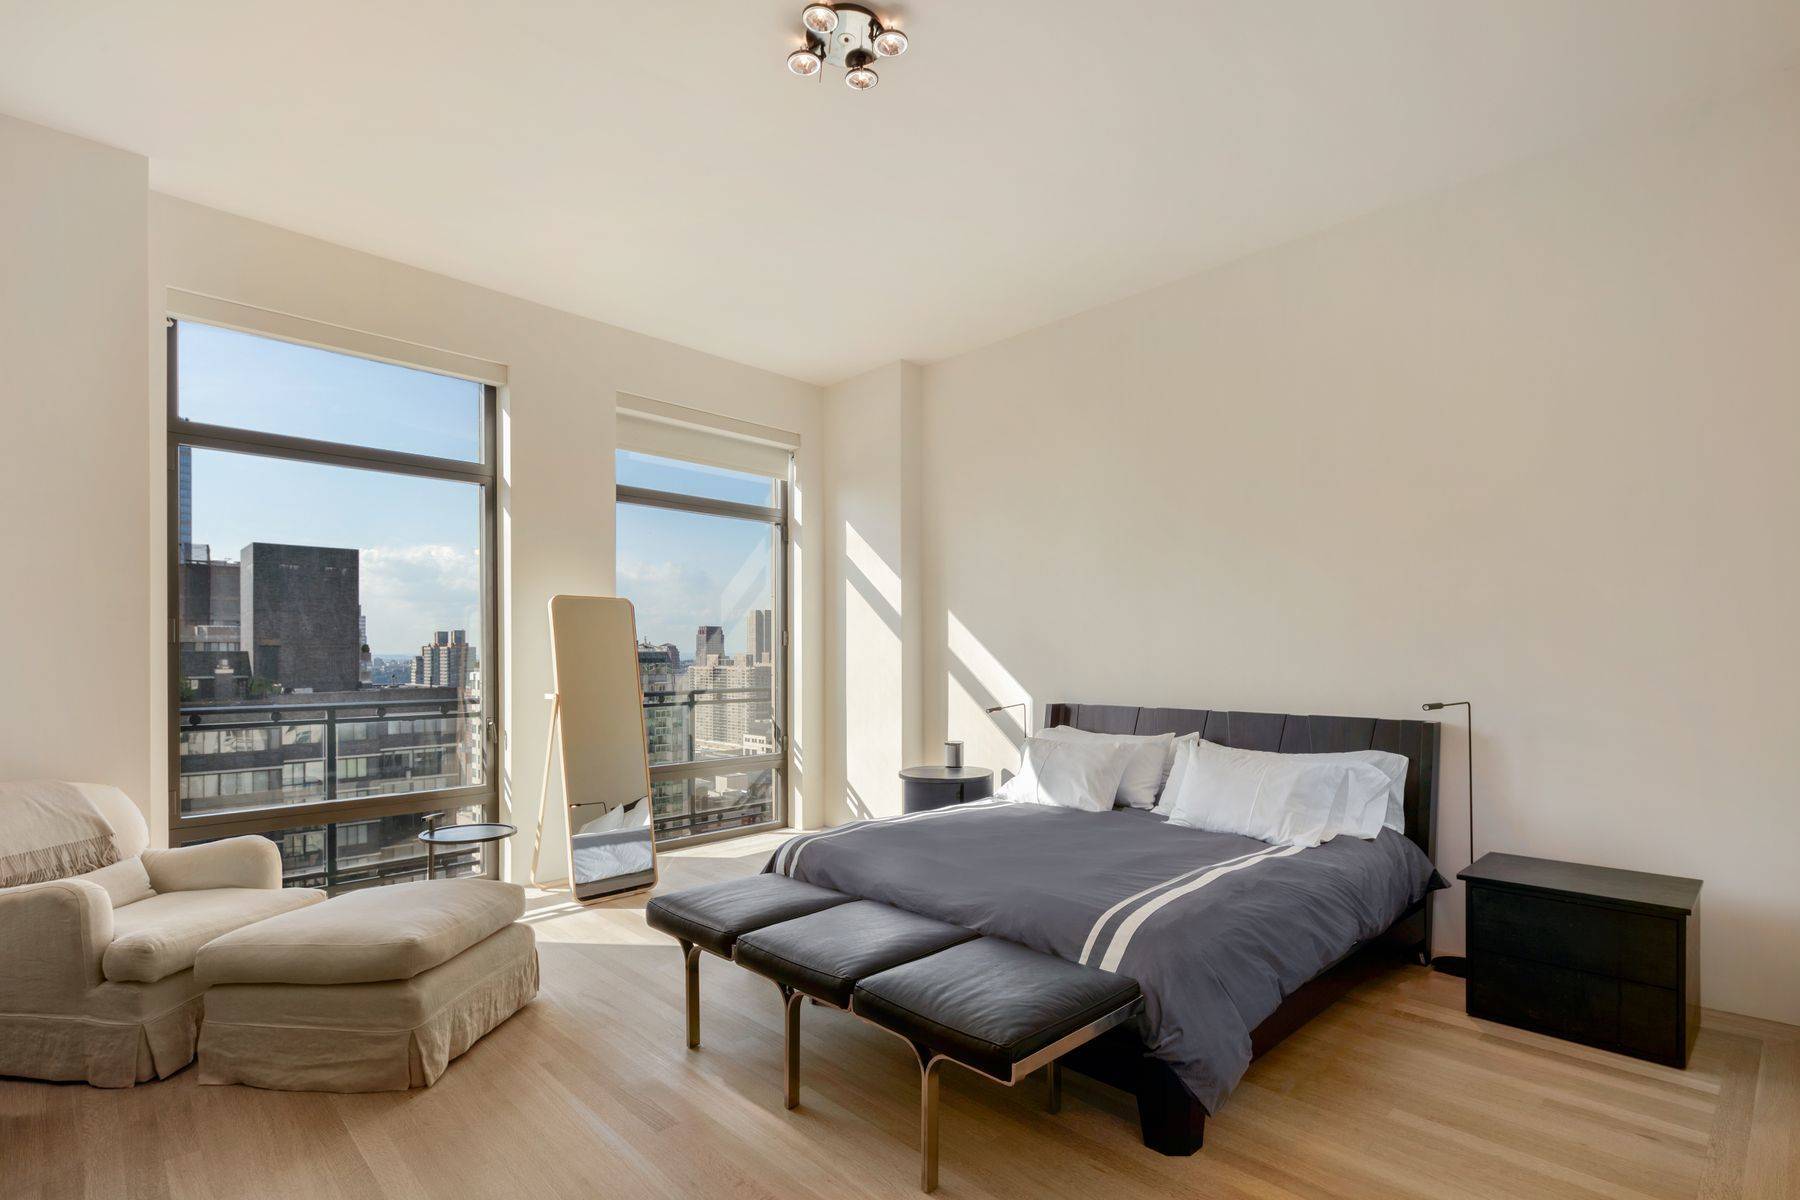 Located high above the Park in the legendary 15 CPW Tower this 2367 sq.